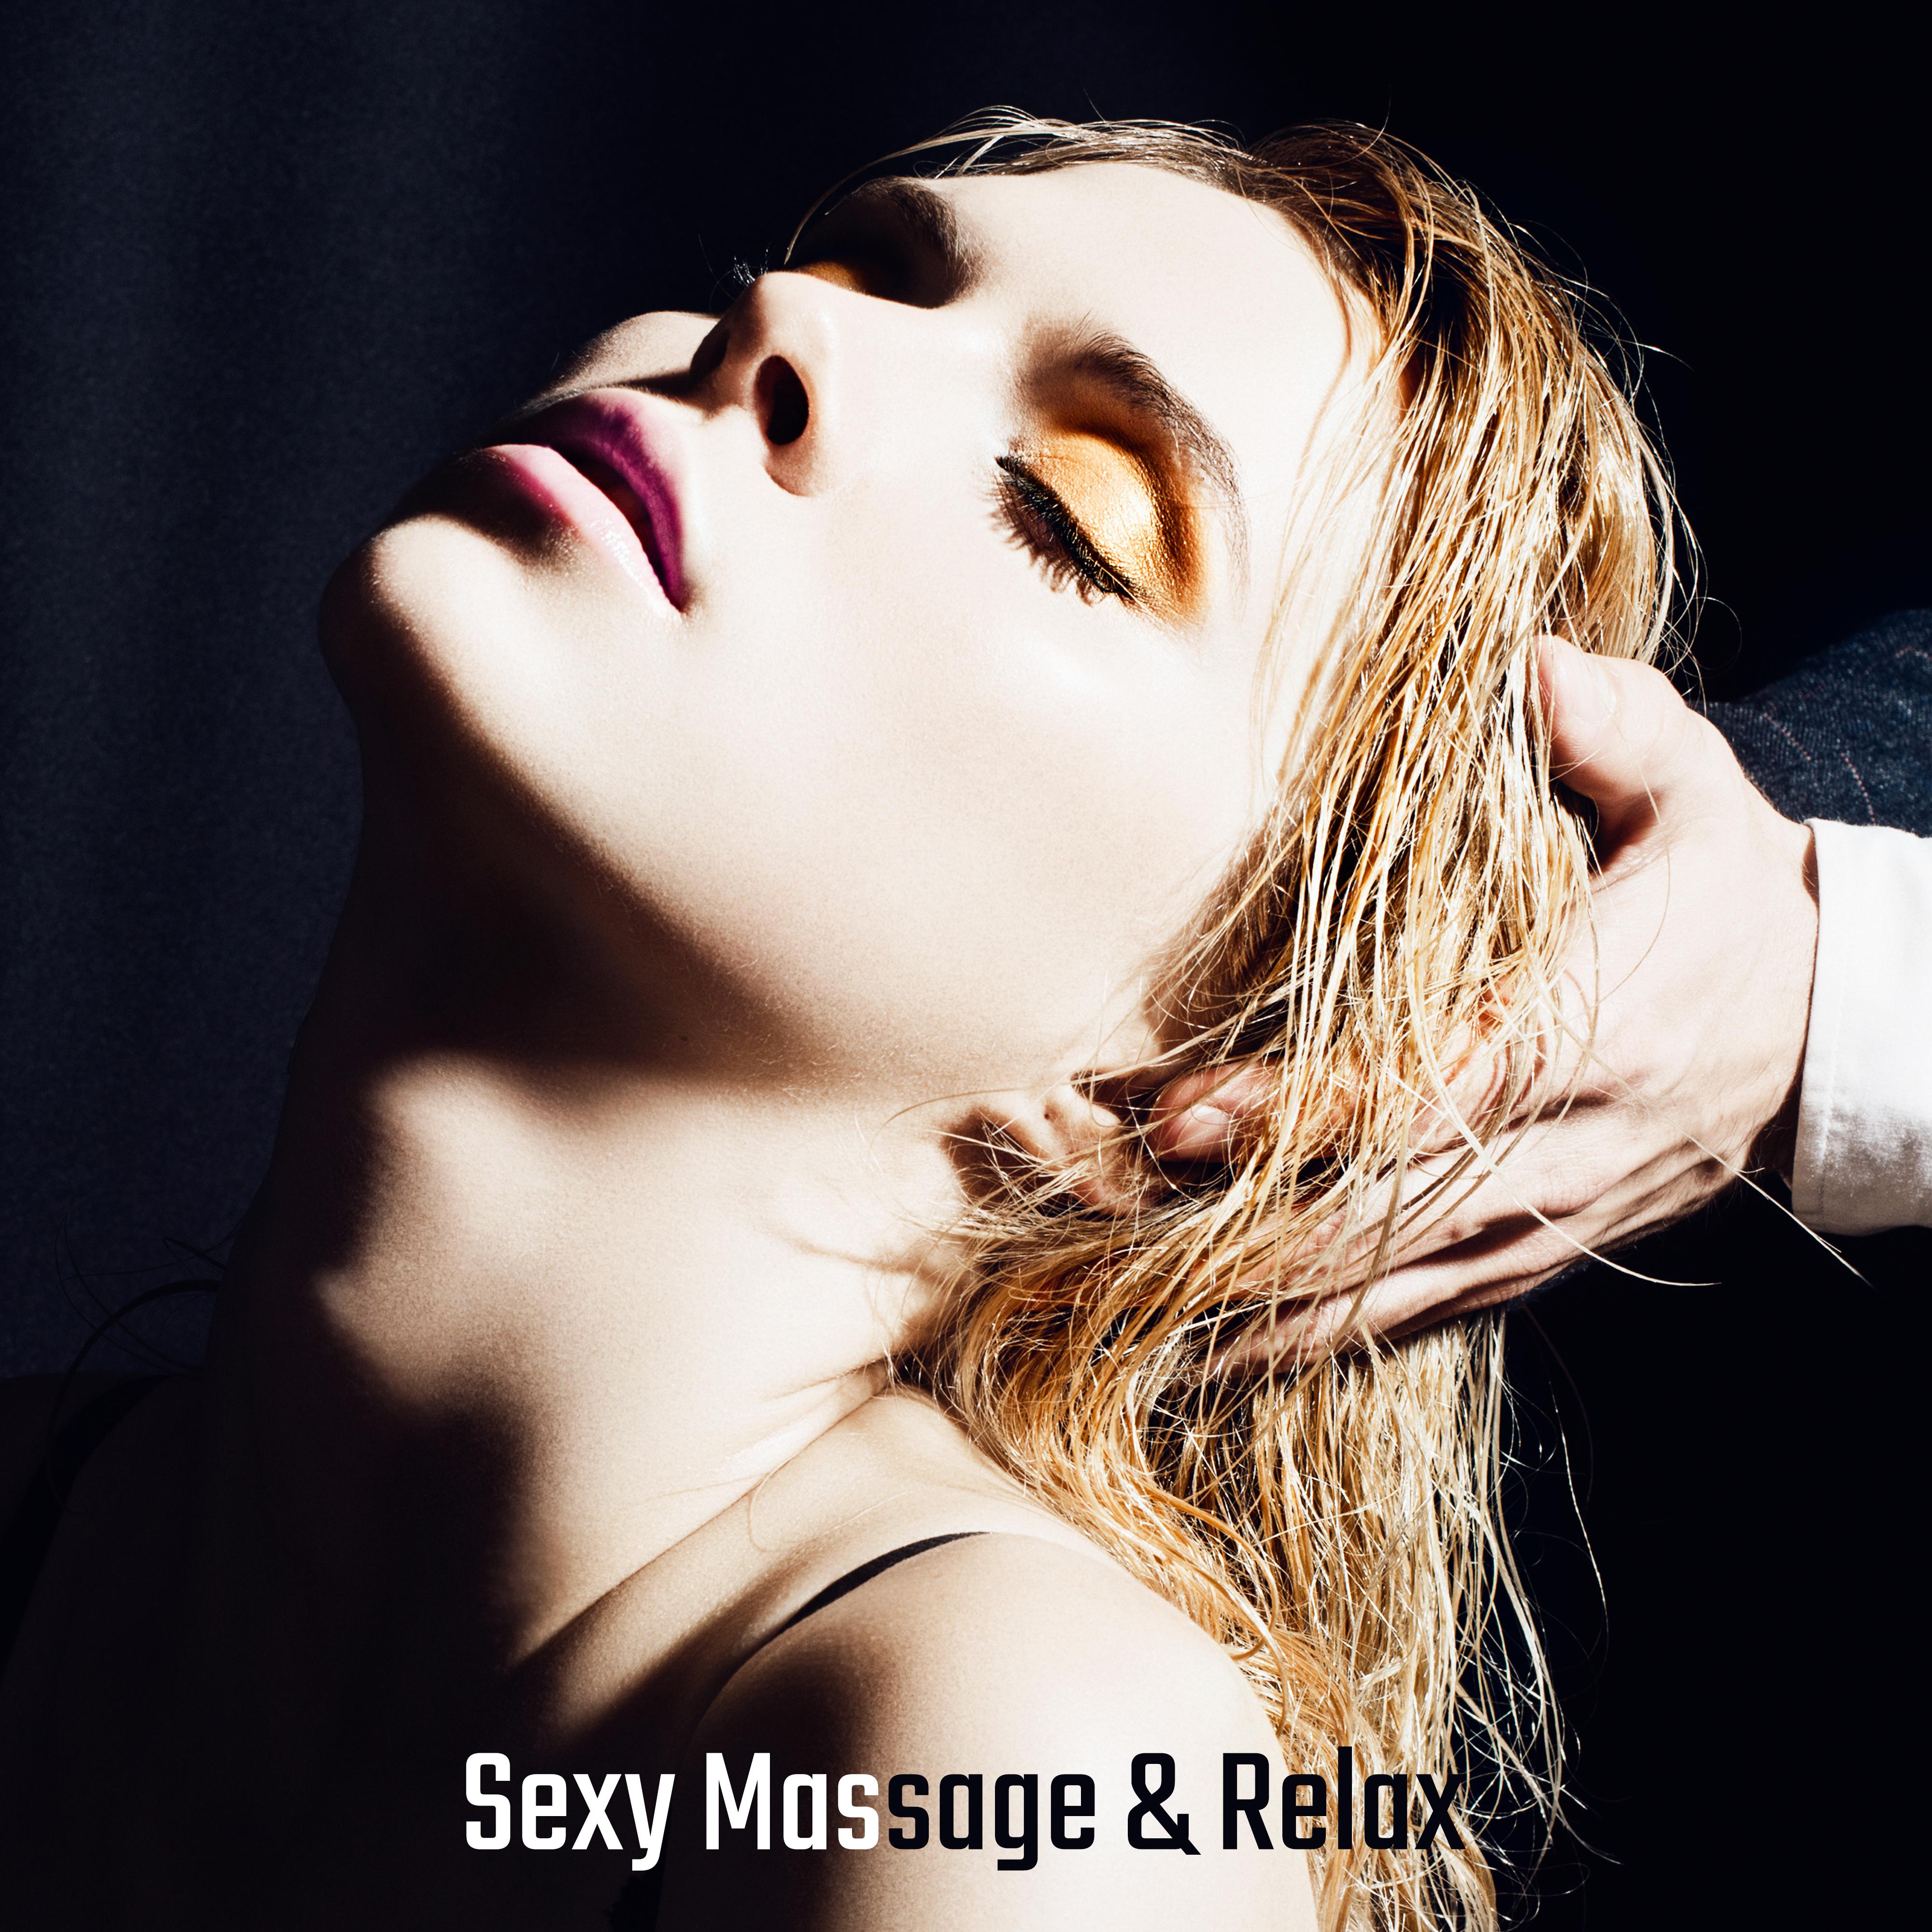 Massage  Relax  Sensual Chillout for Lovers,  Music Zone, Making Love,  Vibes